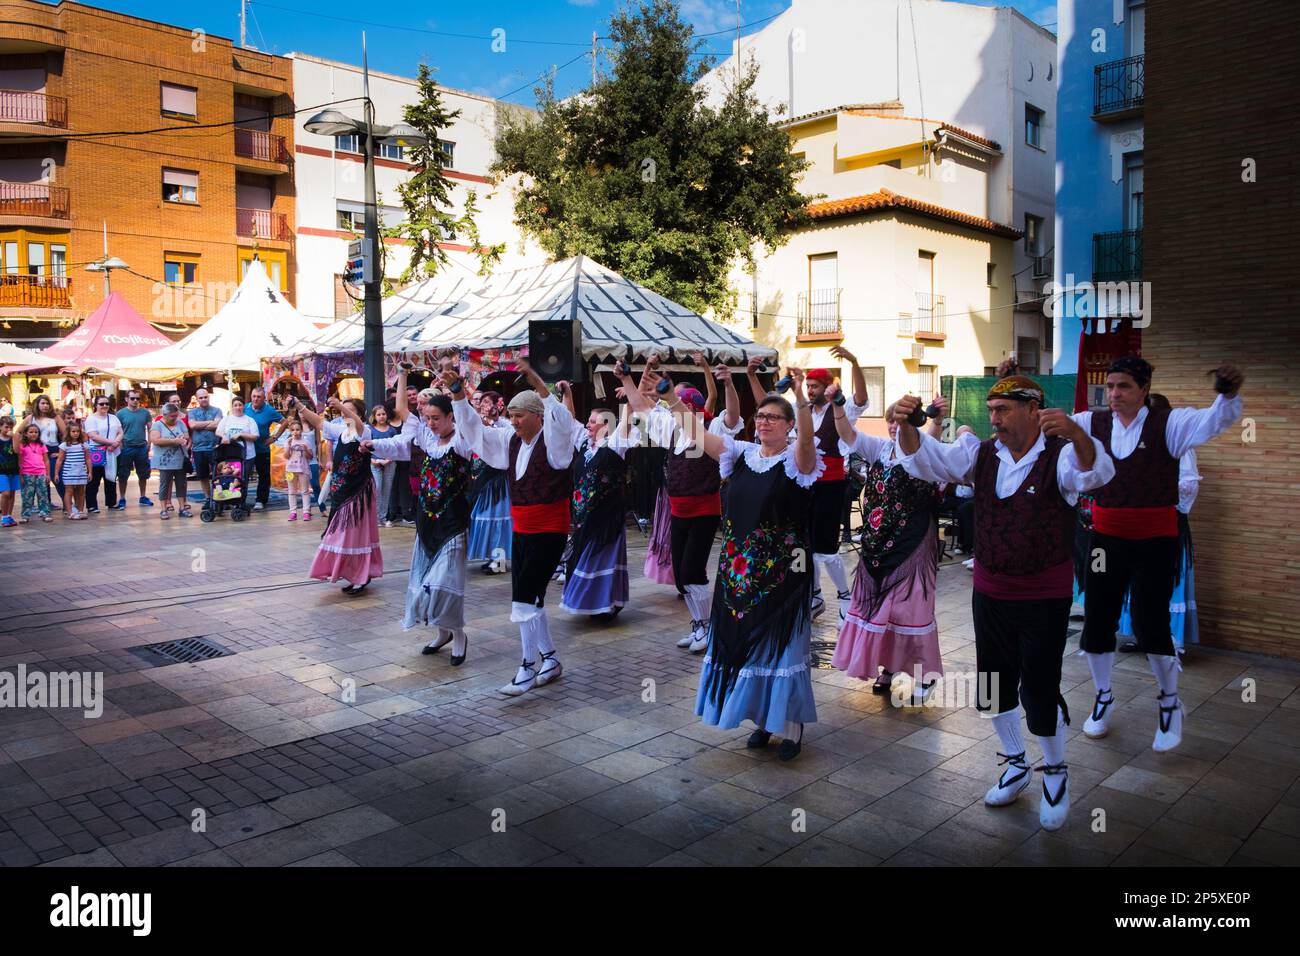 Traditional Spanish Dancing at a Fiesta in a makket square in Spain Stock Photo